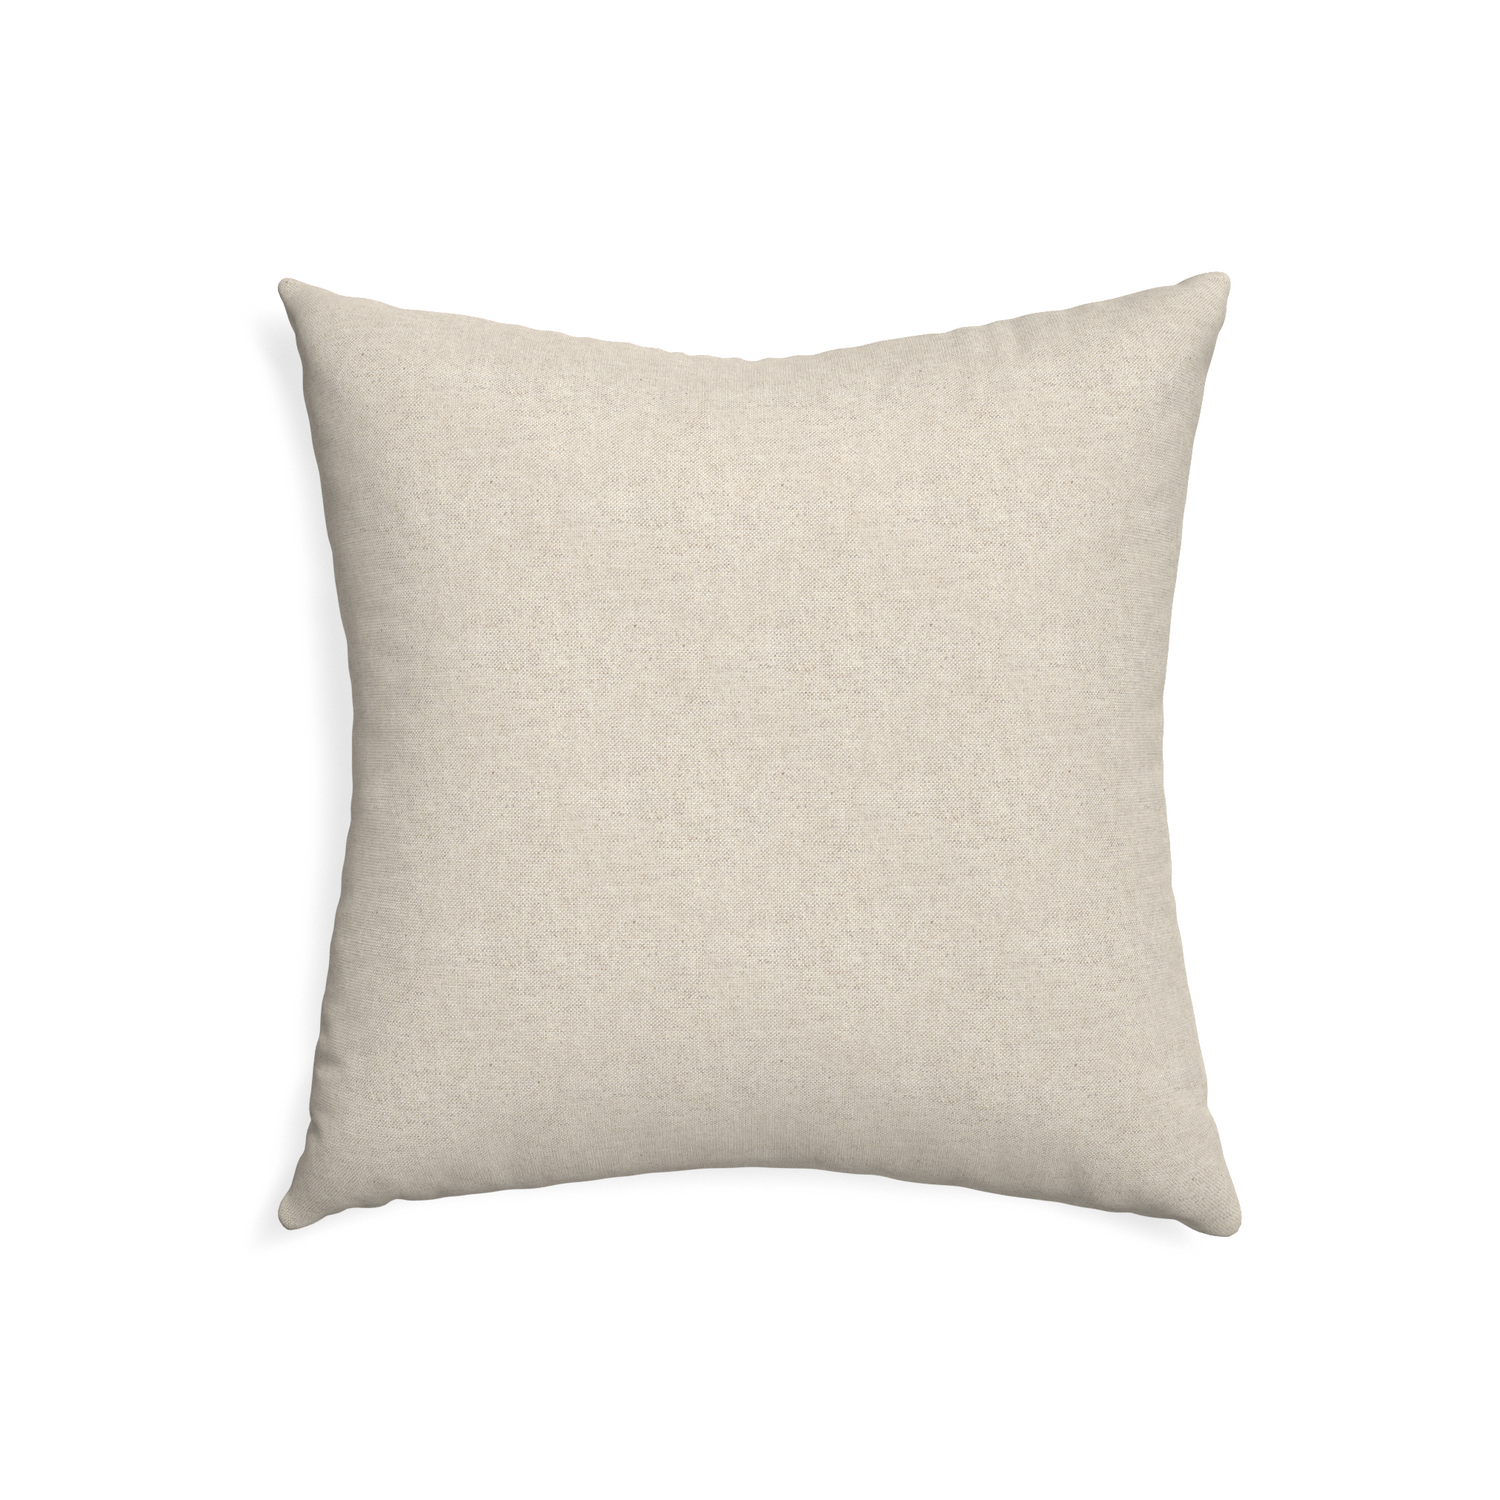 22-square oat custom light brownpillow with none on white background